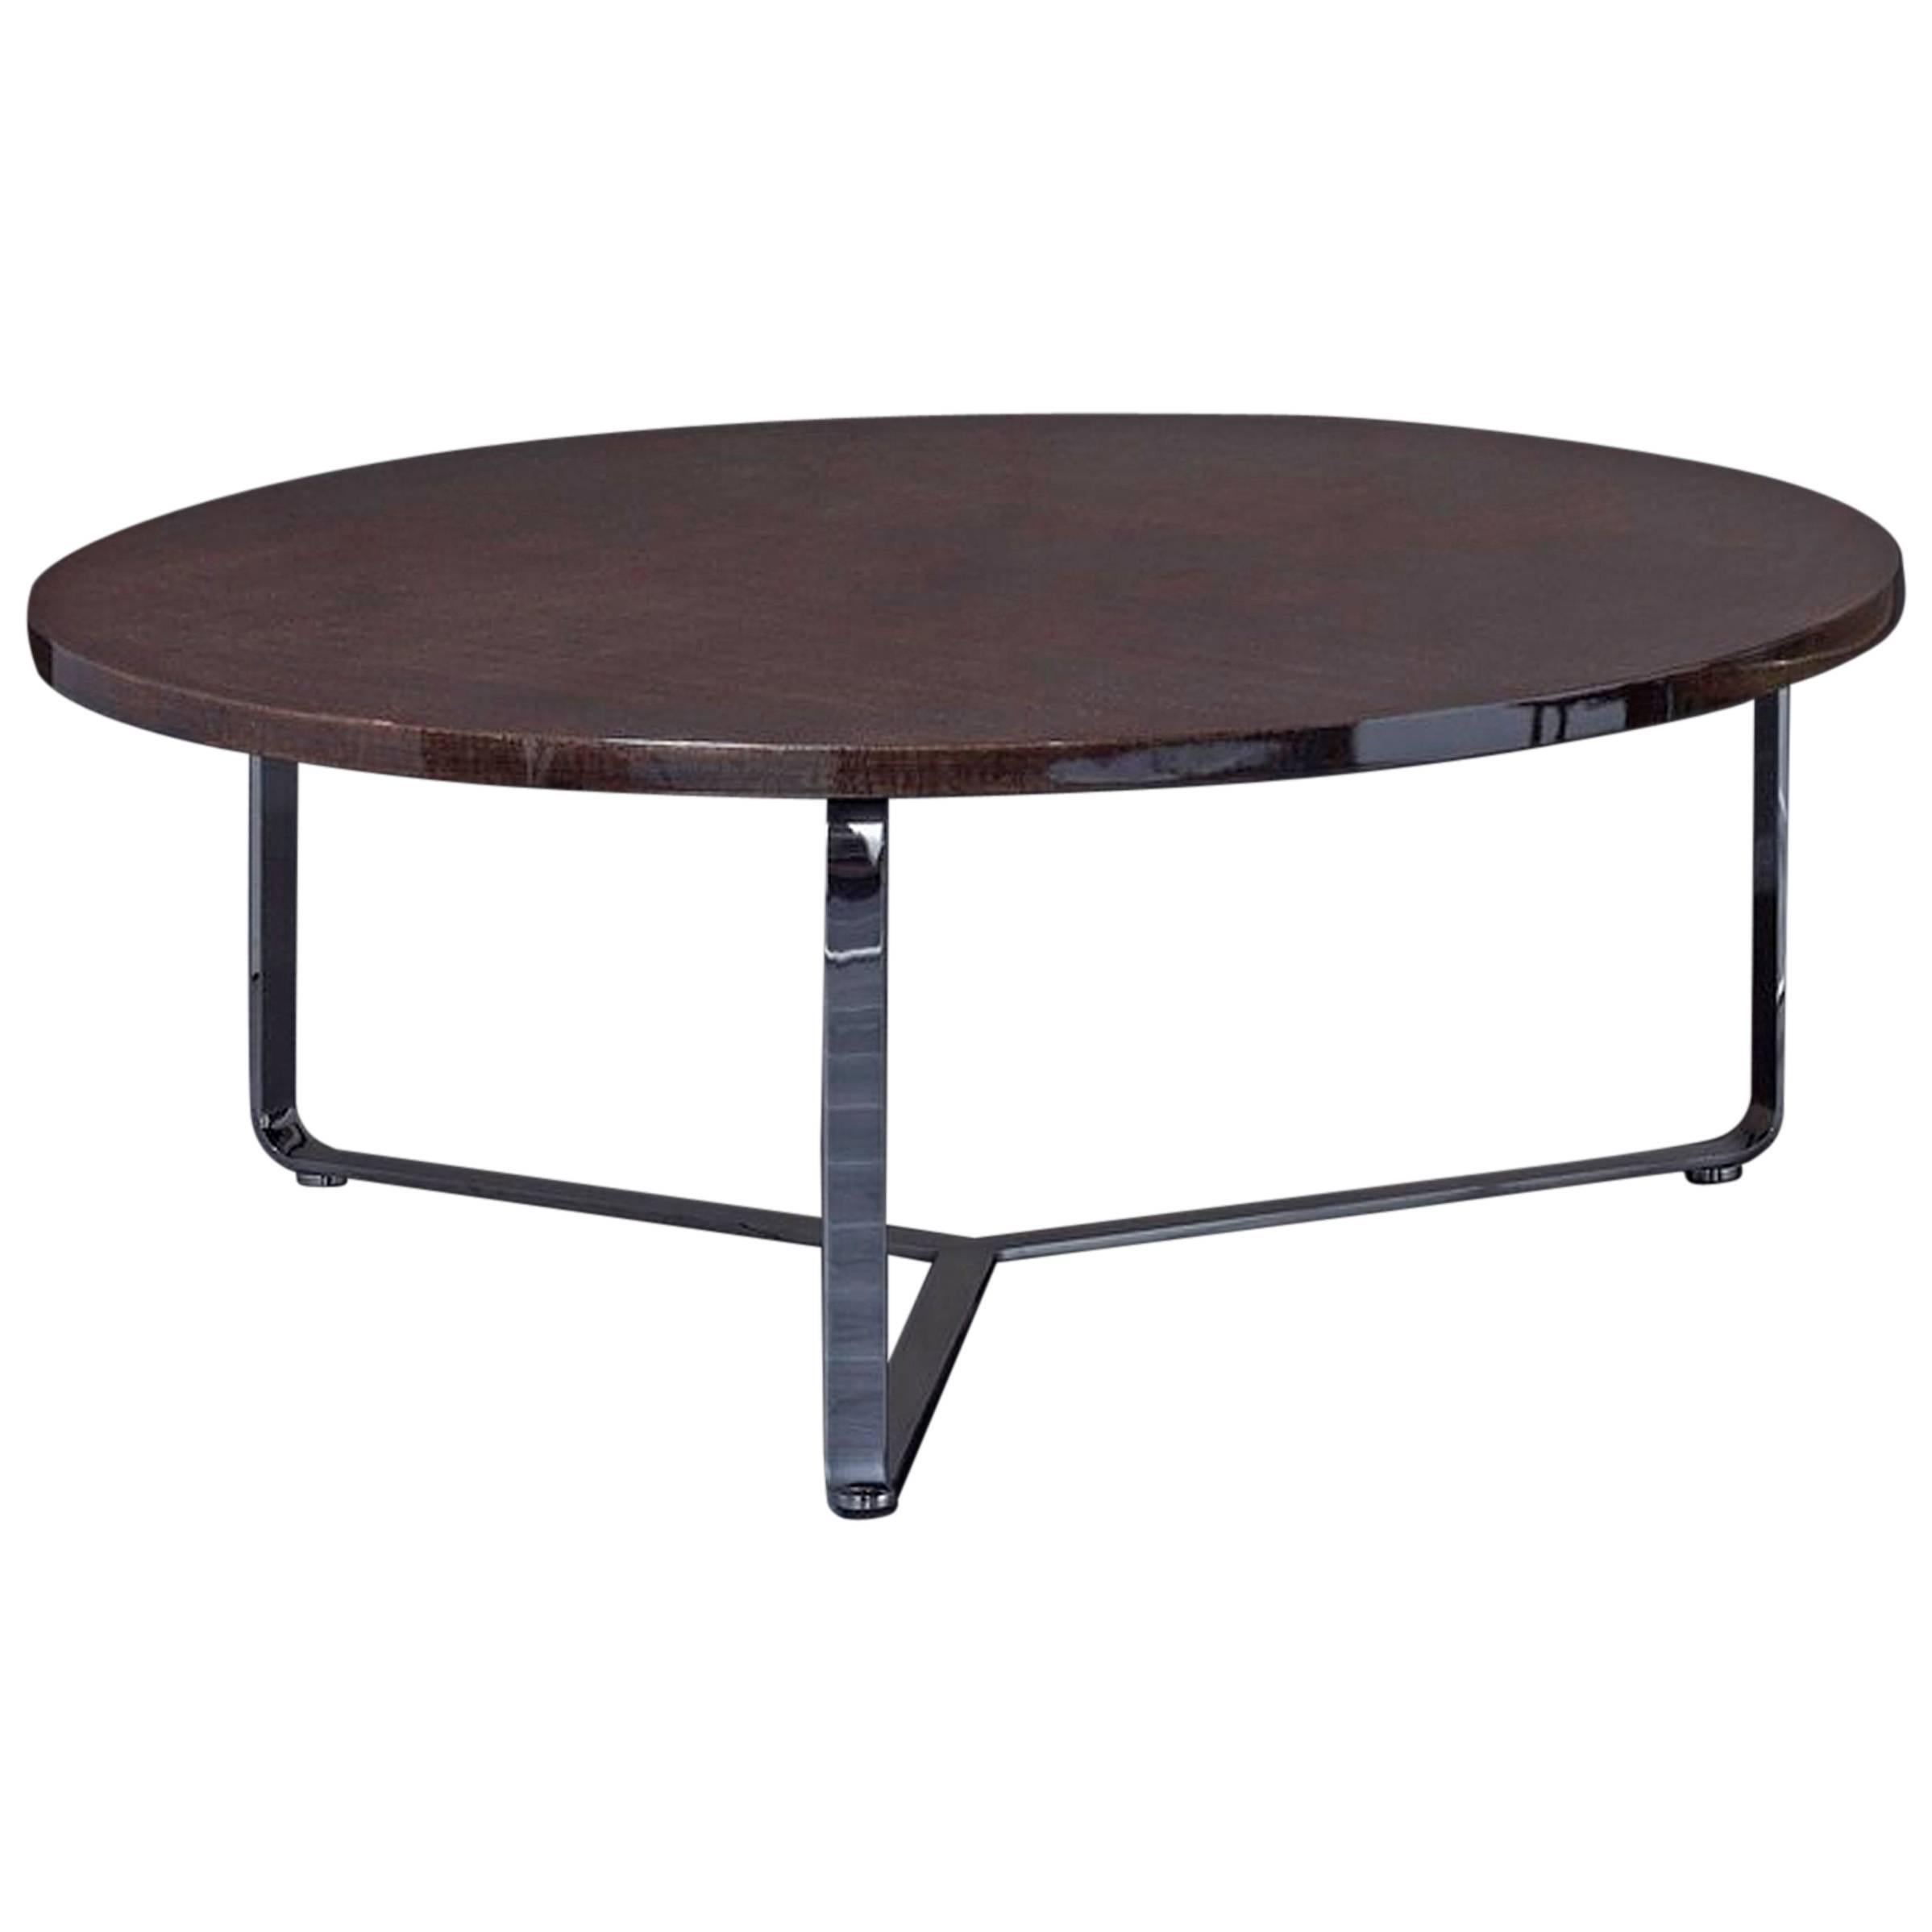 Edge Coffee Table Polished Stainless Steel Structure and Leather Top